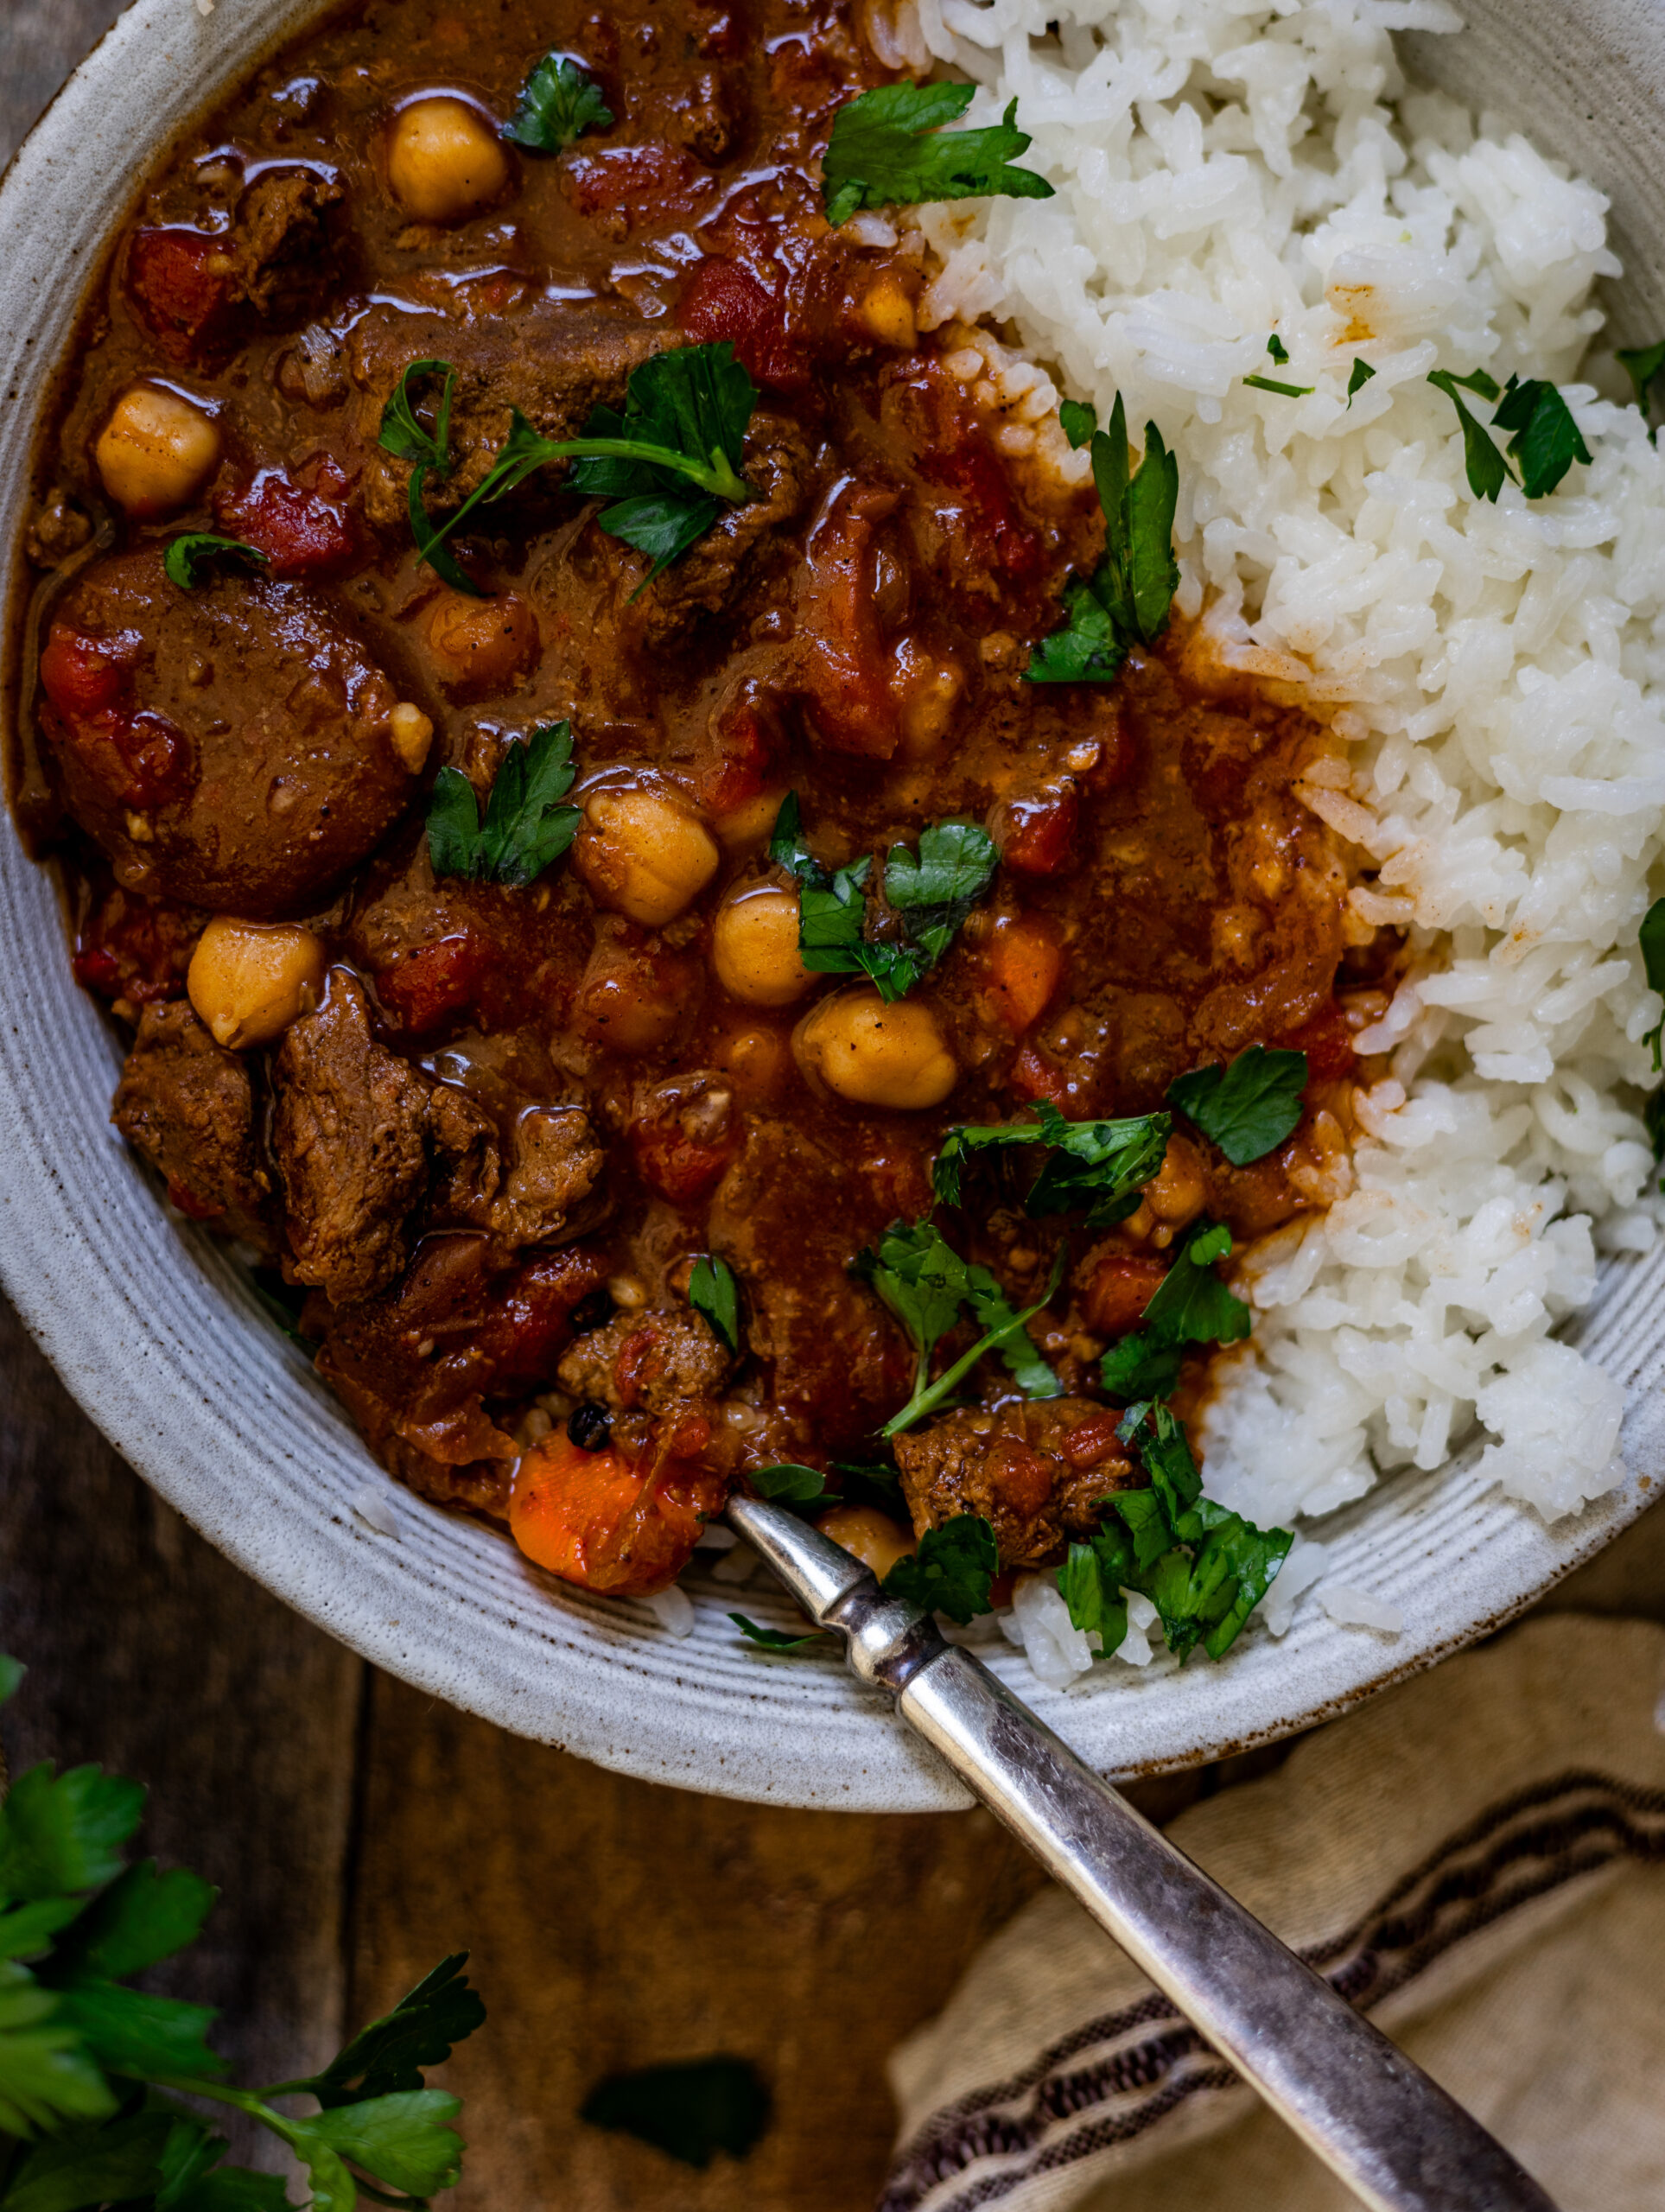 Moroccan stew made with lamb or beff stew meat